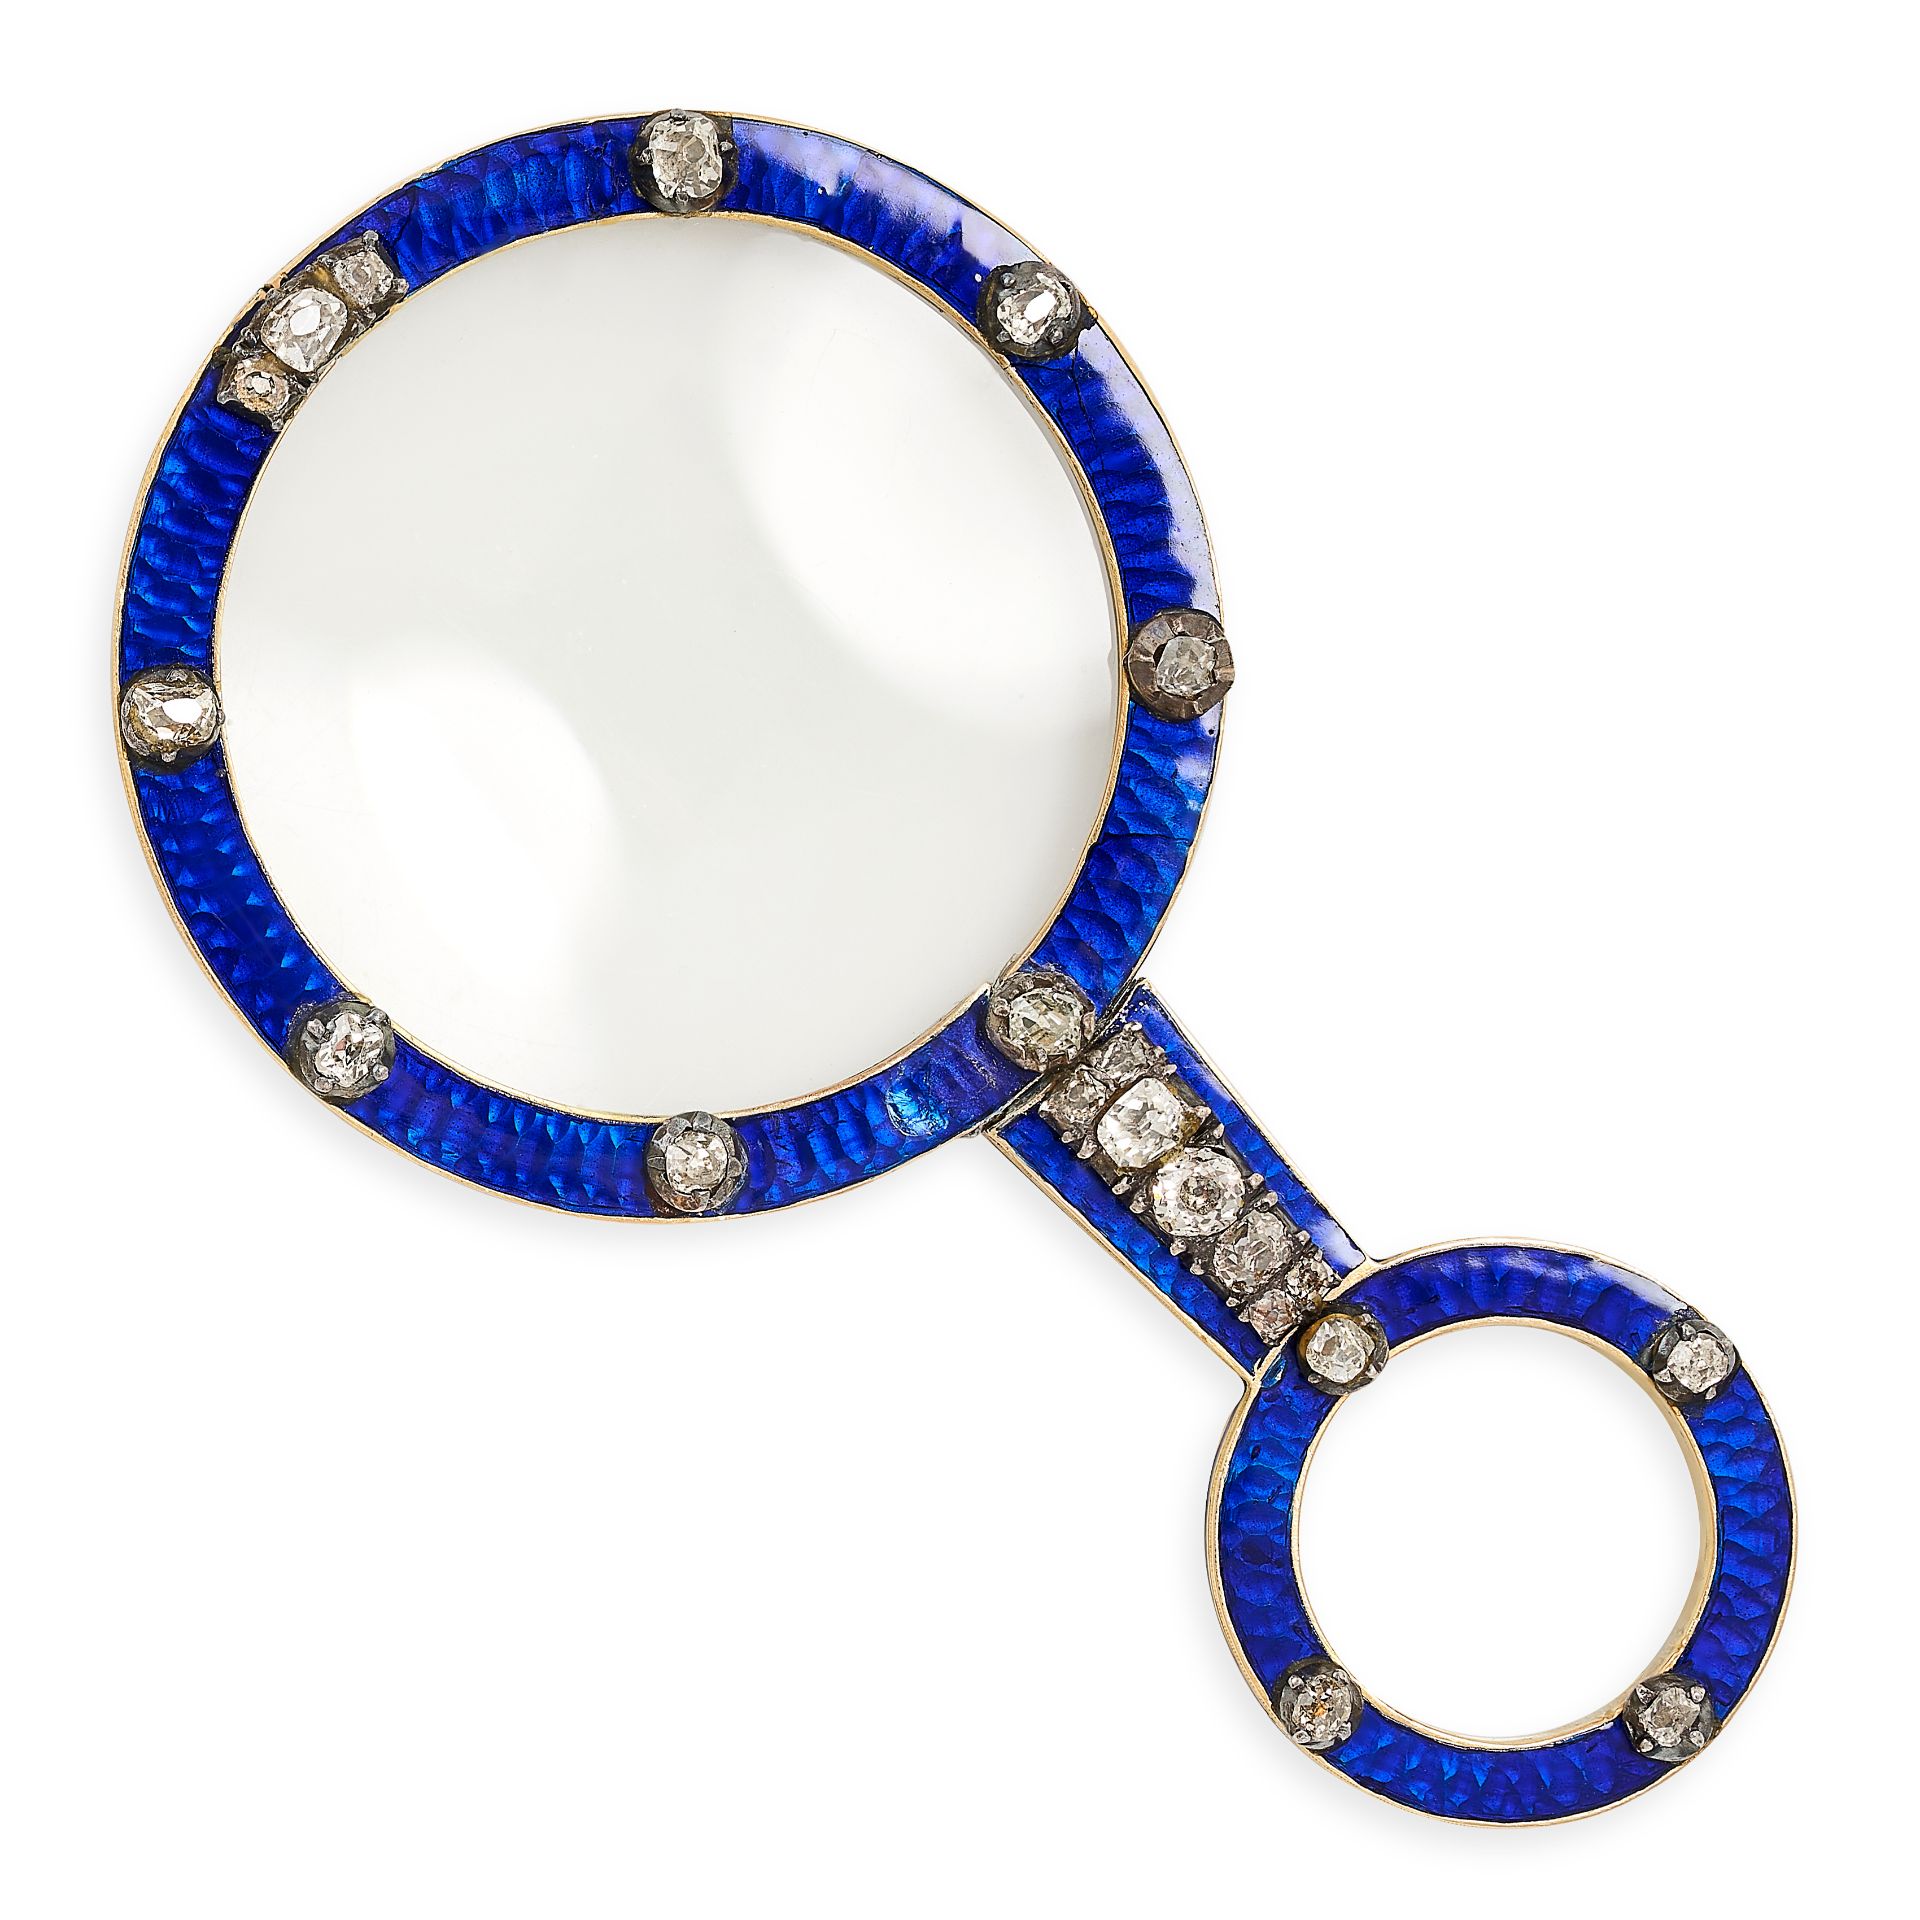 A FINE ANTIQUE ENAMEL AND DIAMOND QUIZZING / MAGNIFYING GLASS in yellow gold, with blue enamelled